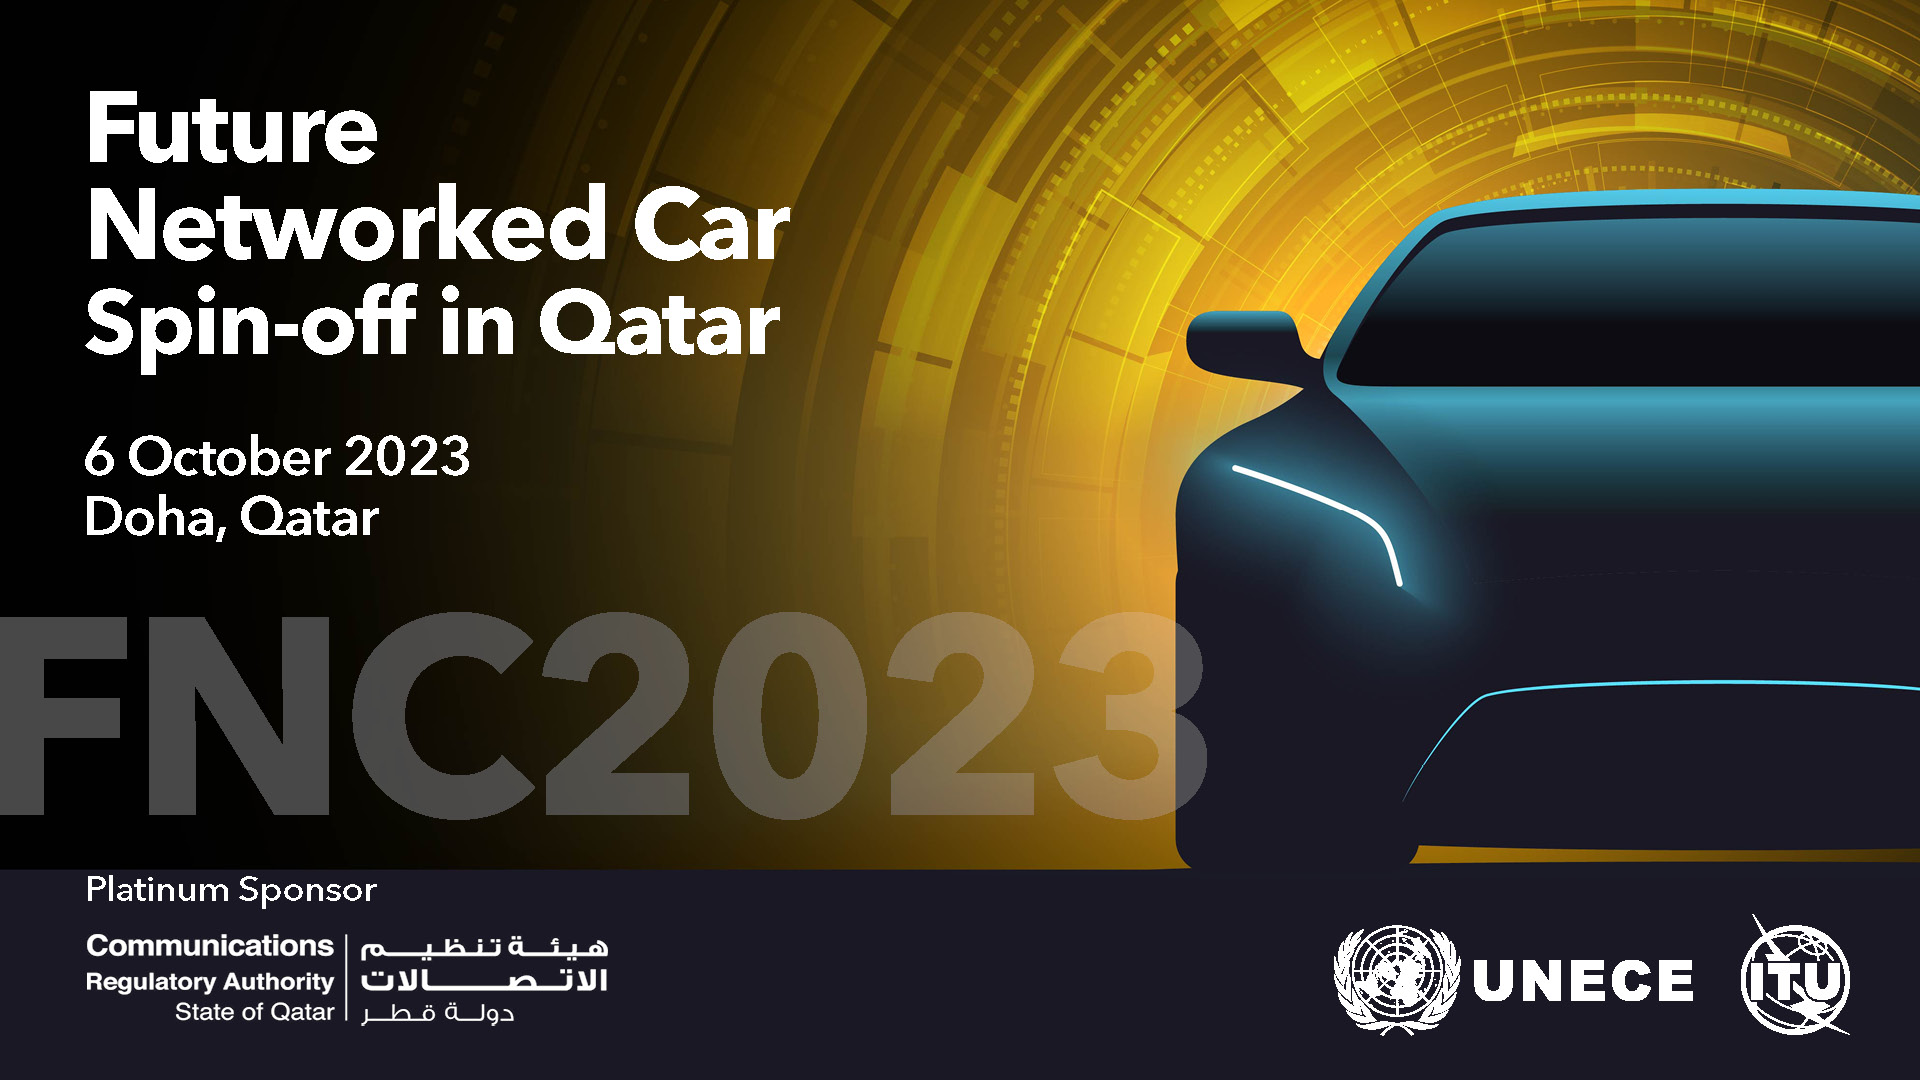 Future Networked Car Symposium Spin-off in Qatar